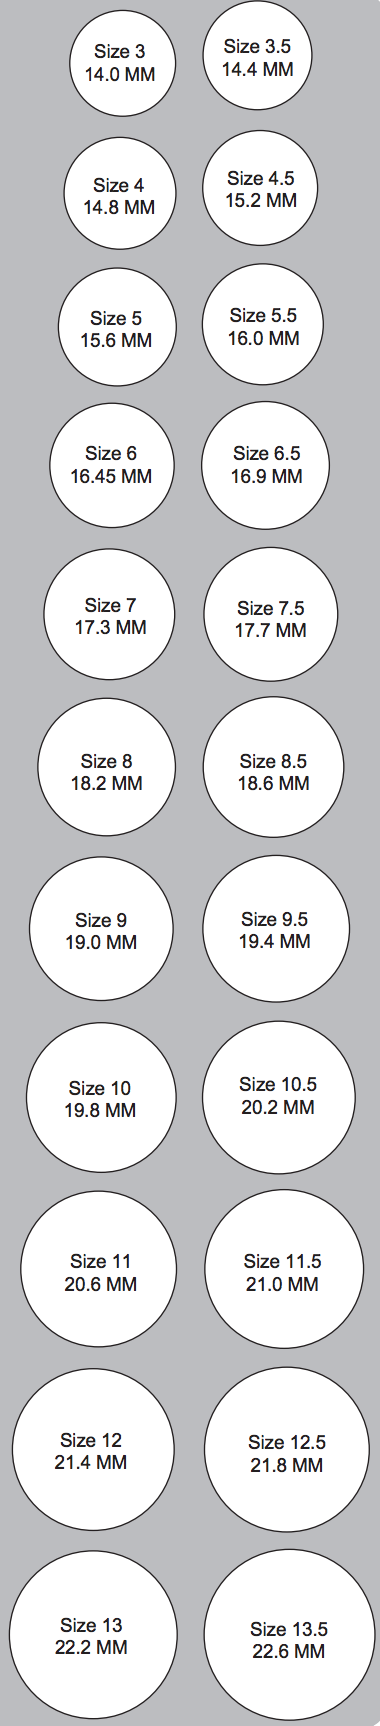 A ring size chart to help determine ring size against a grey background.